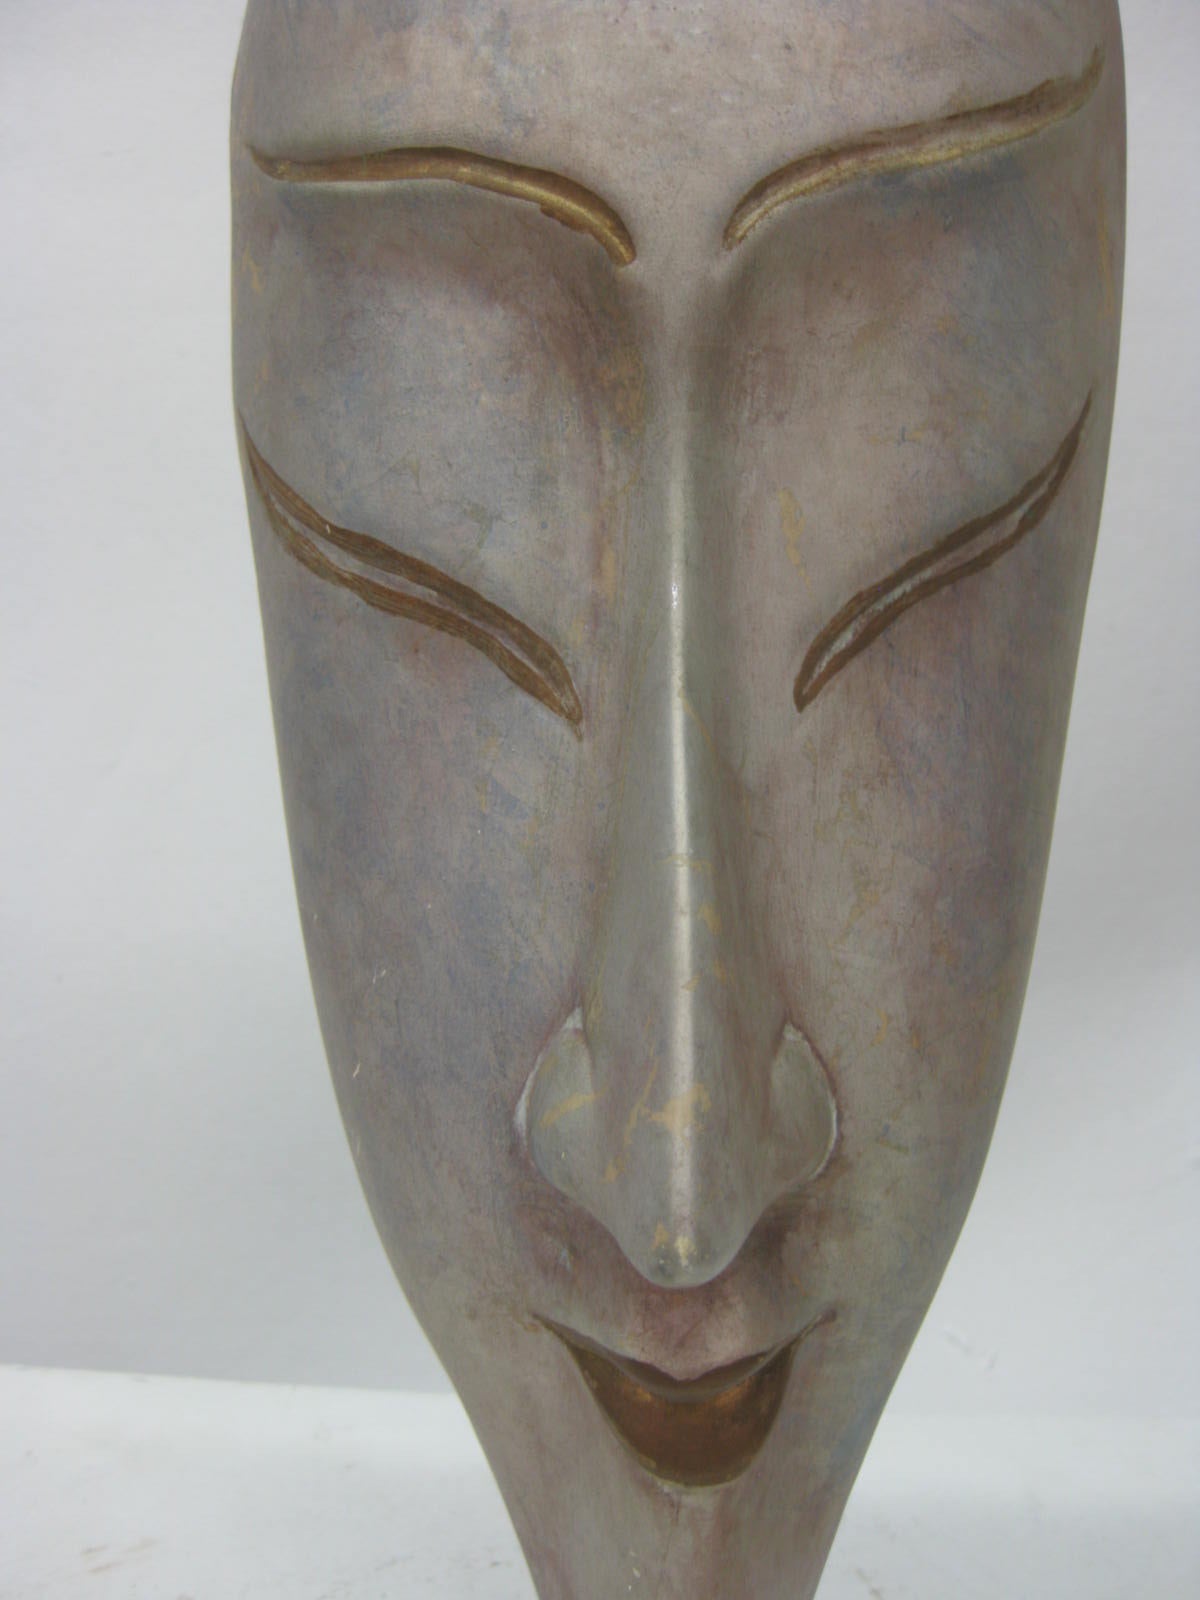 This hand-painted mask featuring a female face. Gold accents that highlight lips and eyes suggest Japanese culture.
It is resting on a clear Lucite mounted base.